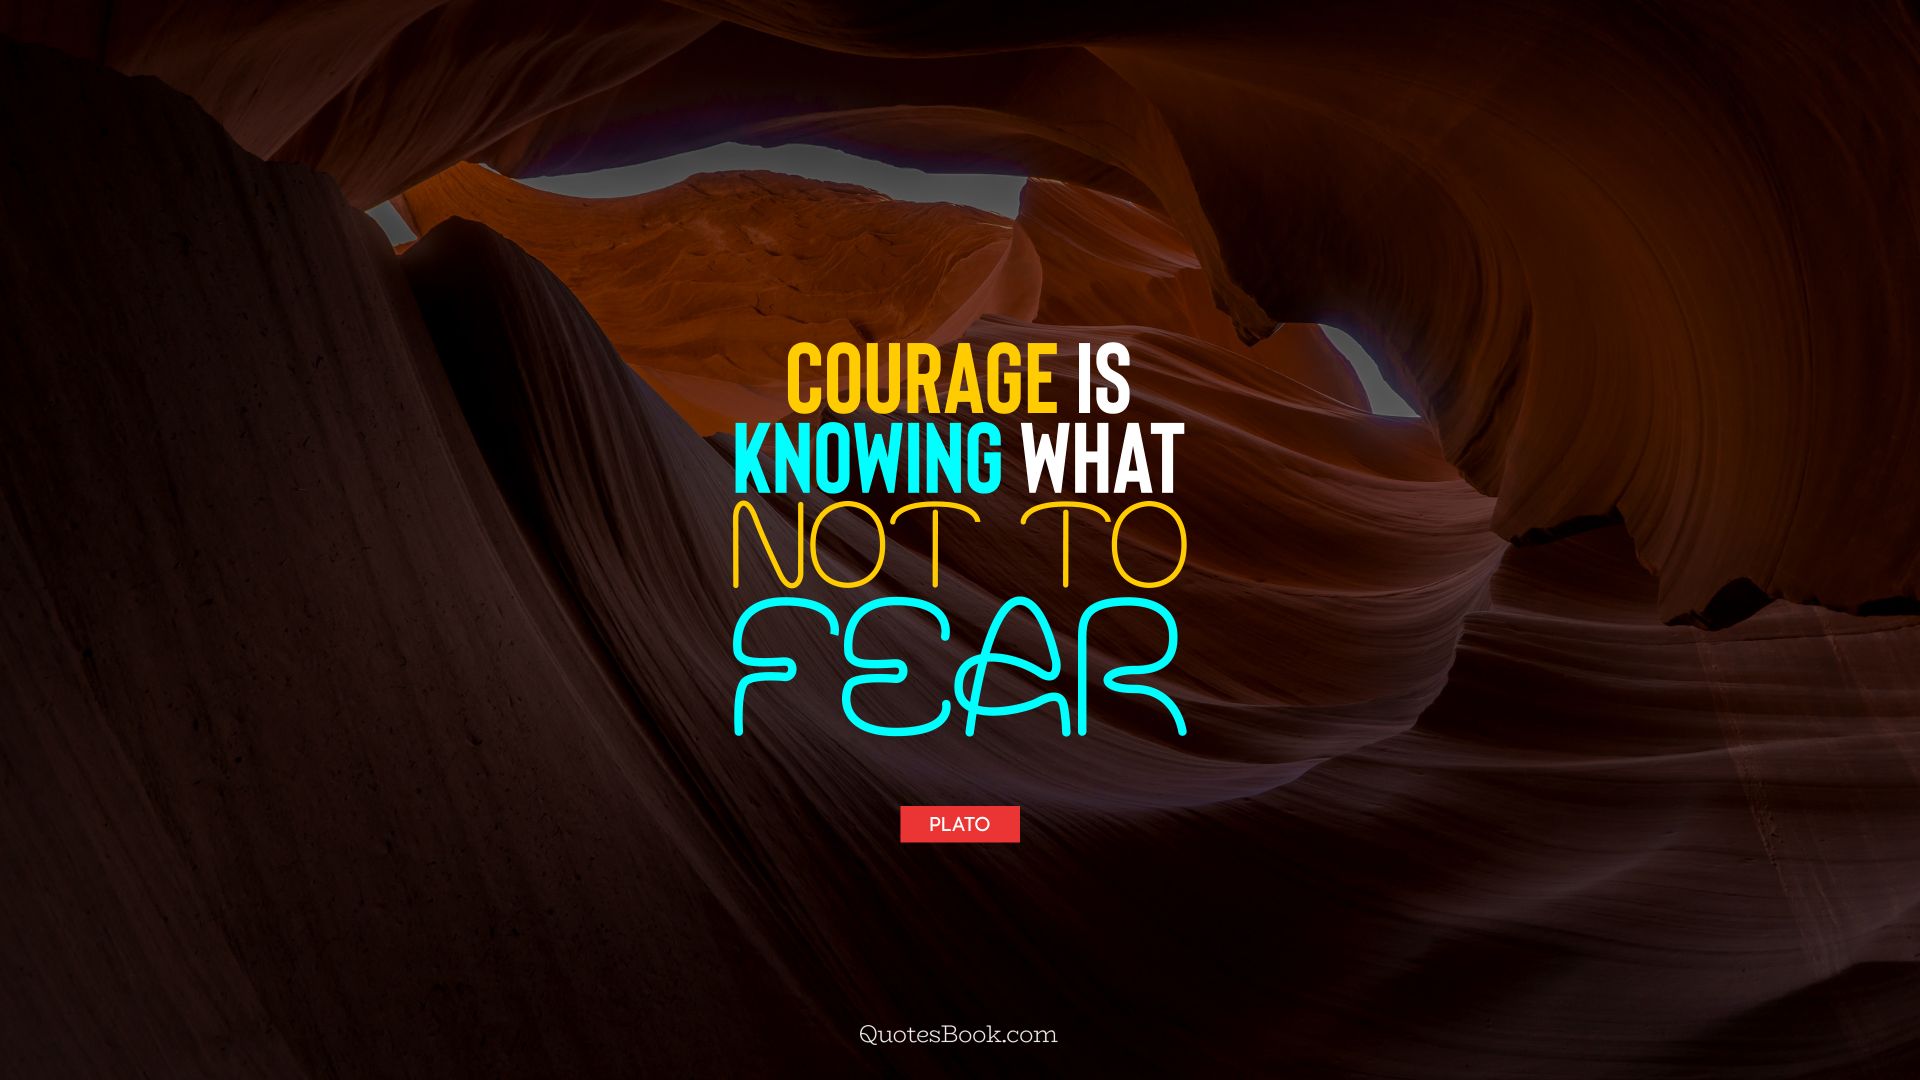 Courage is knowing what not to fear. - Quote by Plato